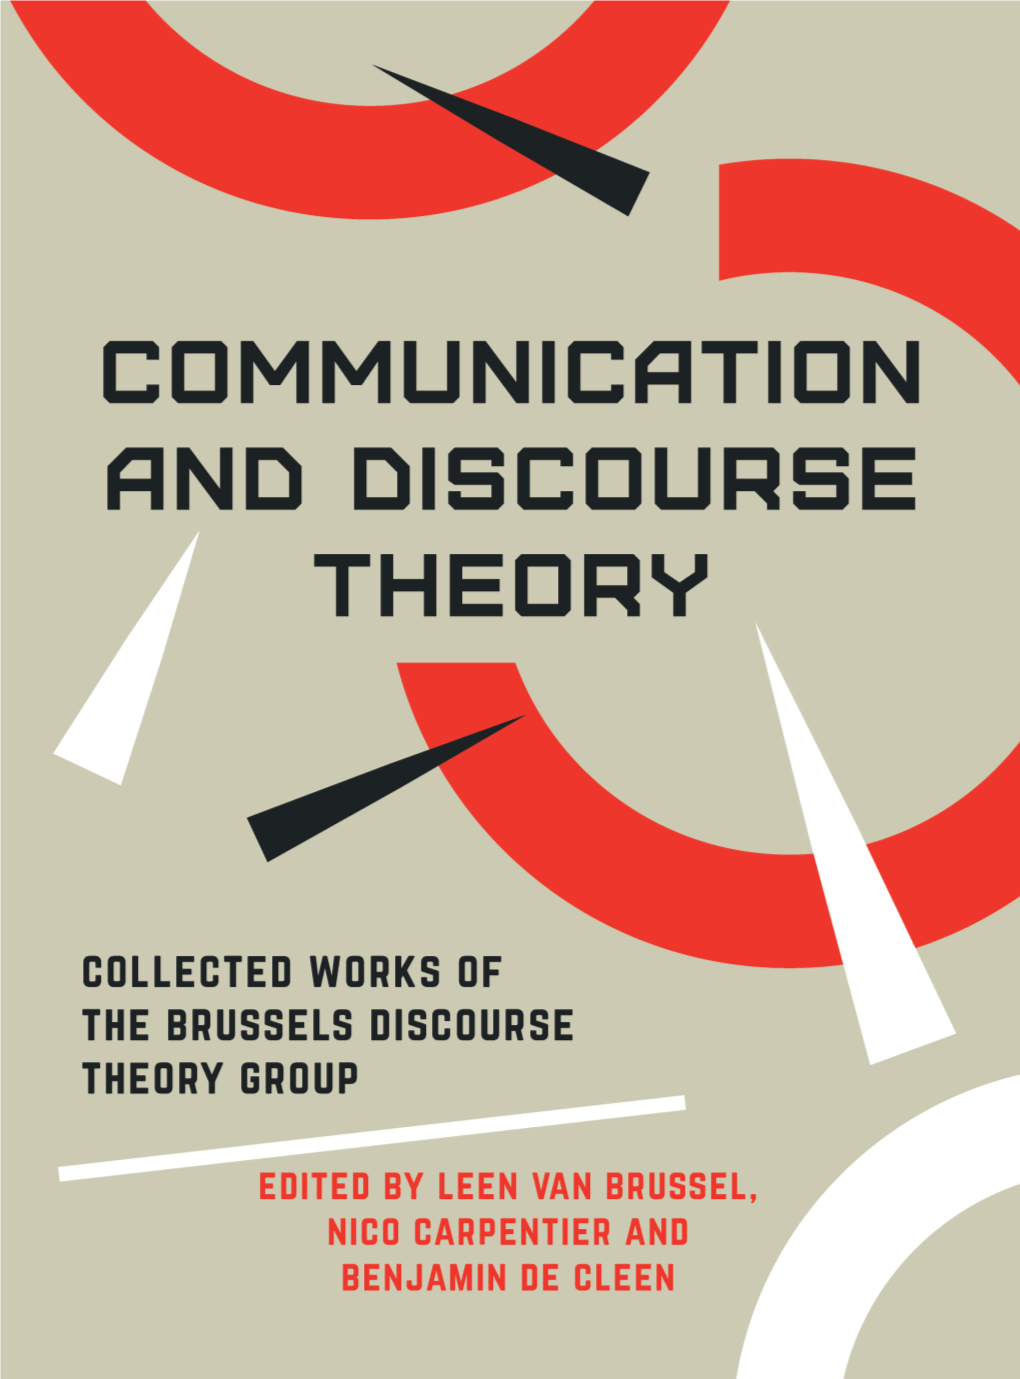 Collected Works of the Brussels Discourse Theory Group